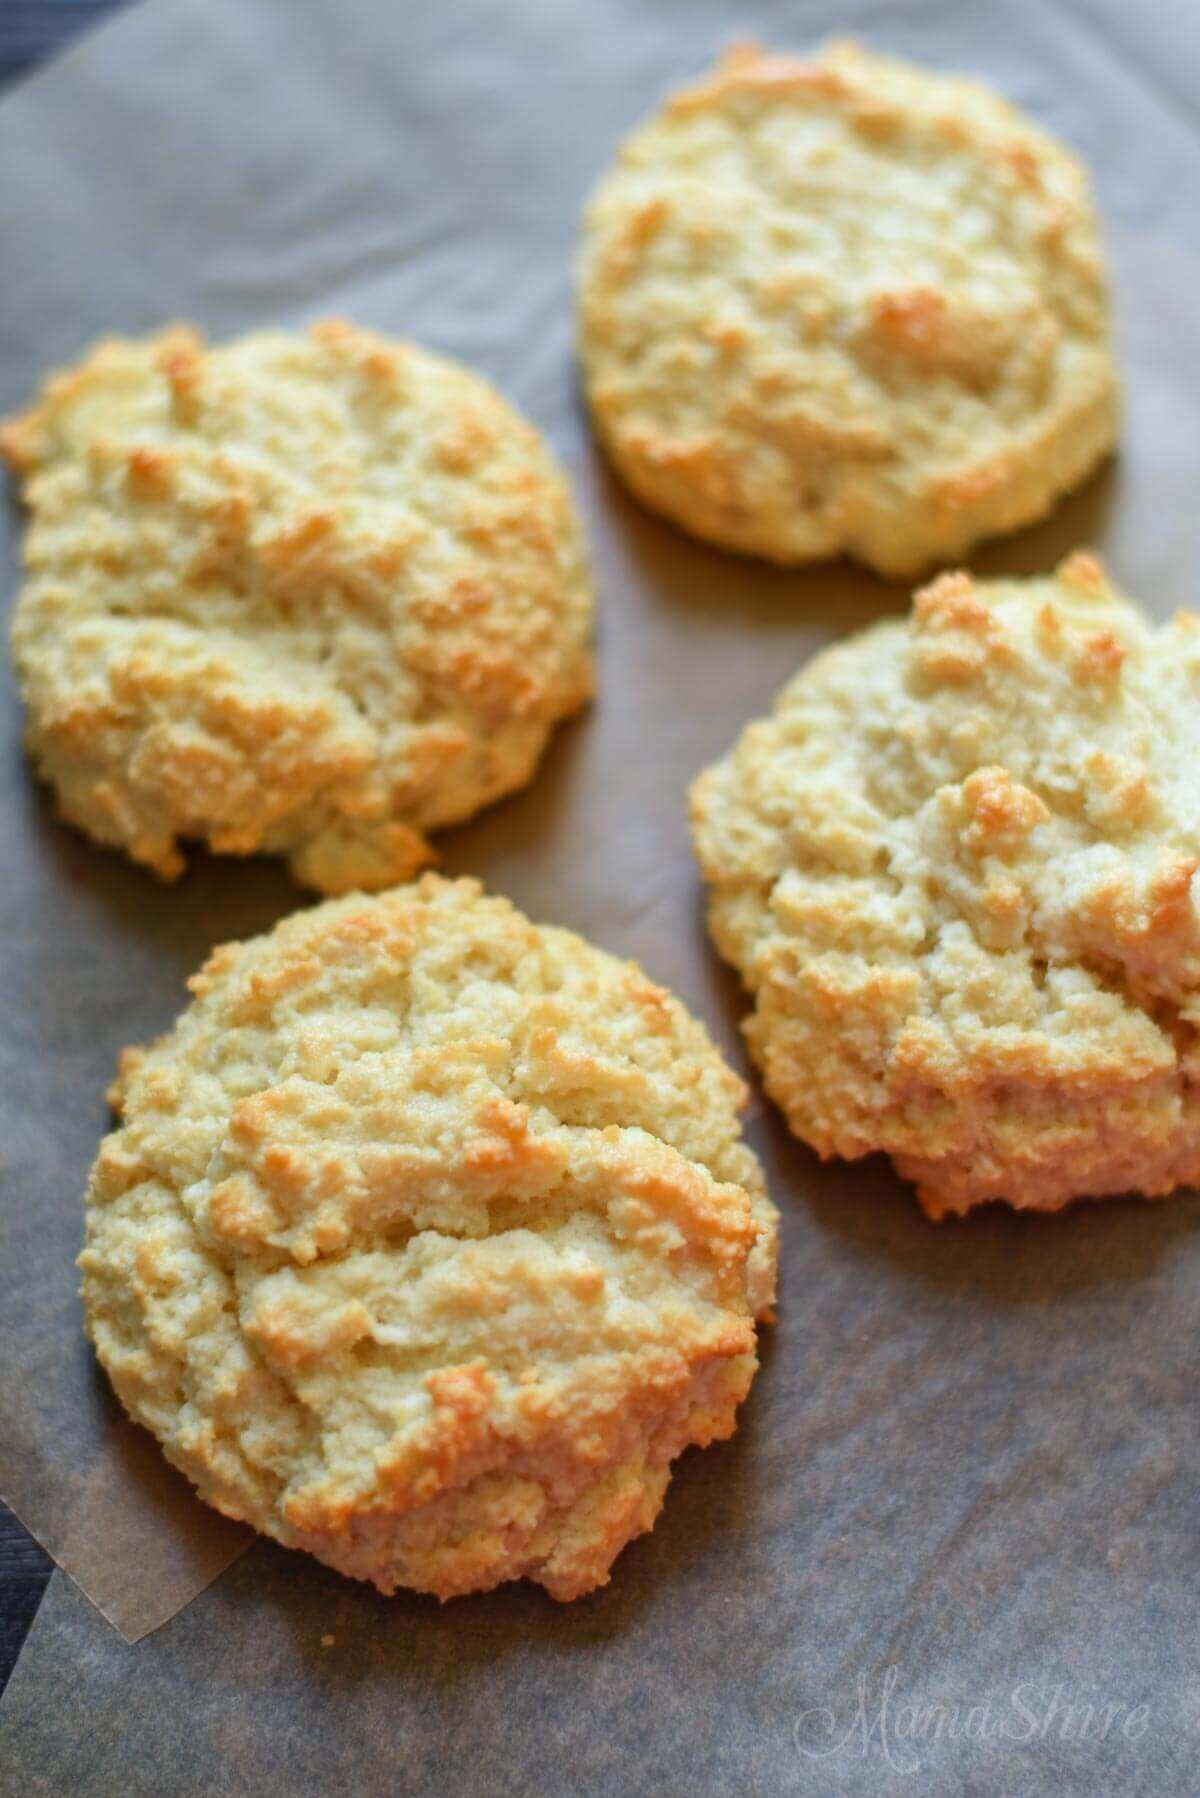 50 Best Gluten-Free Biscuit Recipes that You Can't Stop Eating in 2020